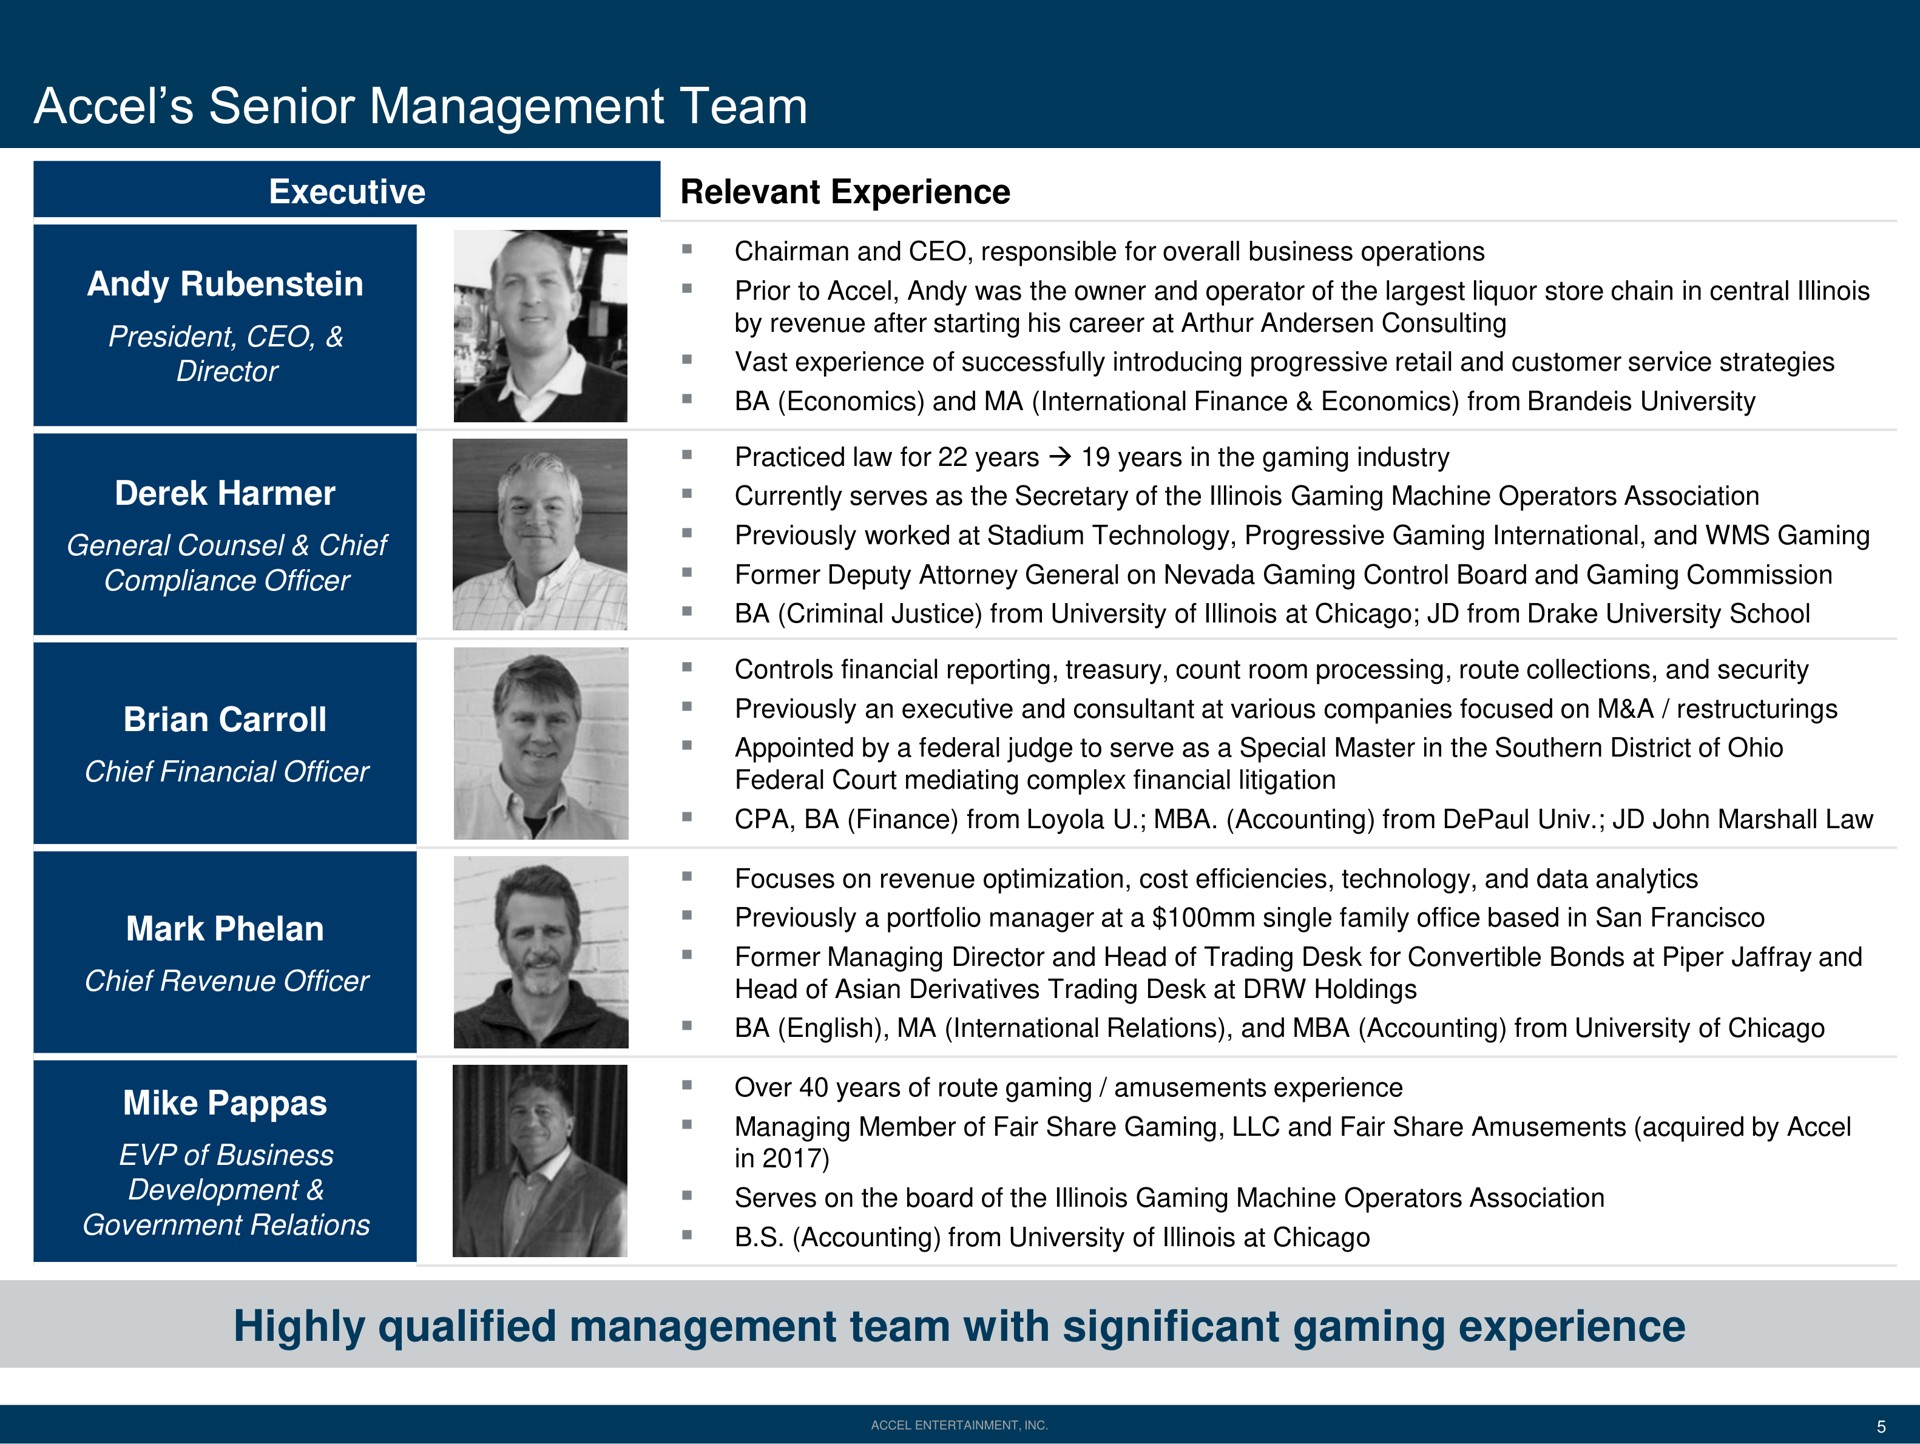 senior management team highly qualified management team with significant gaming experience | Accel Entertaiment